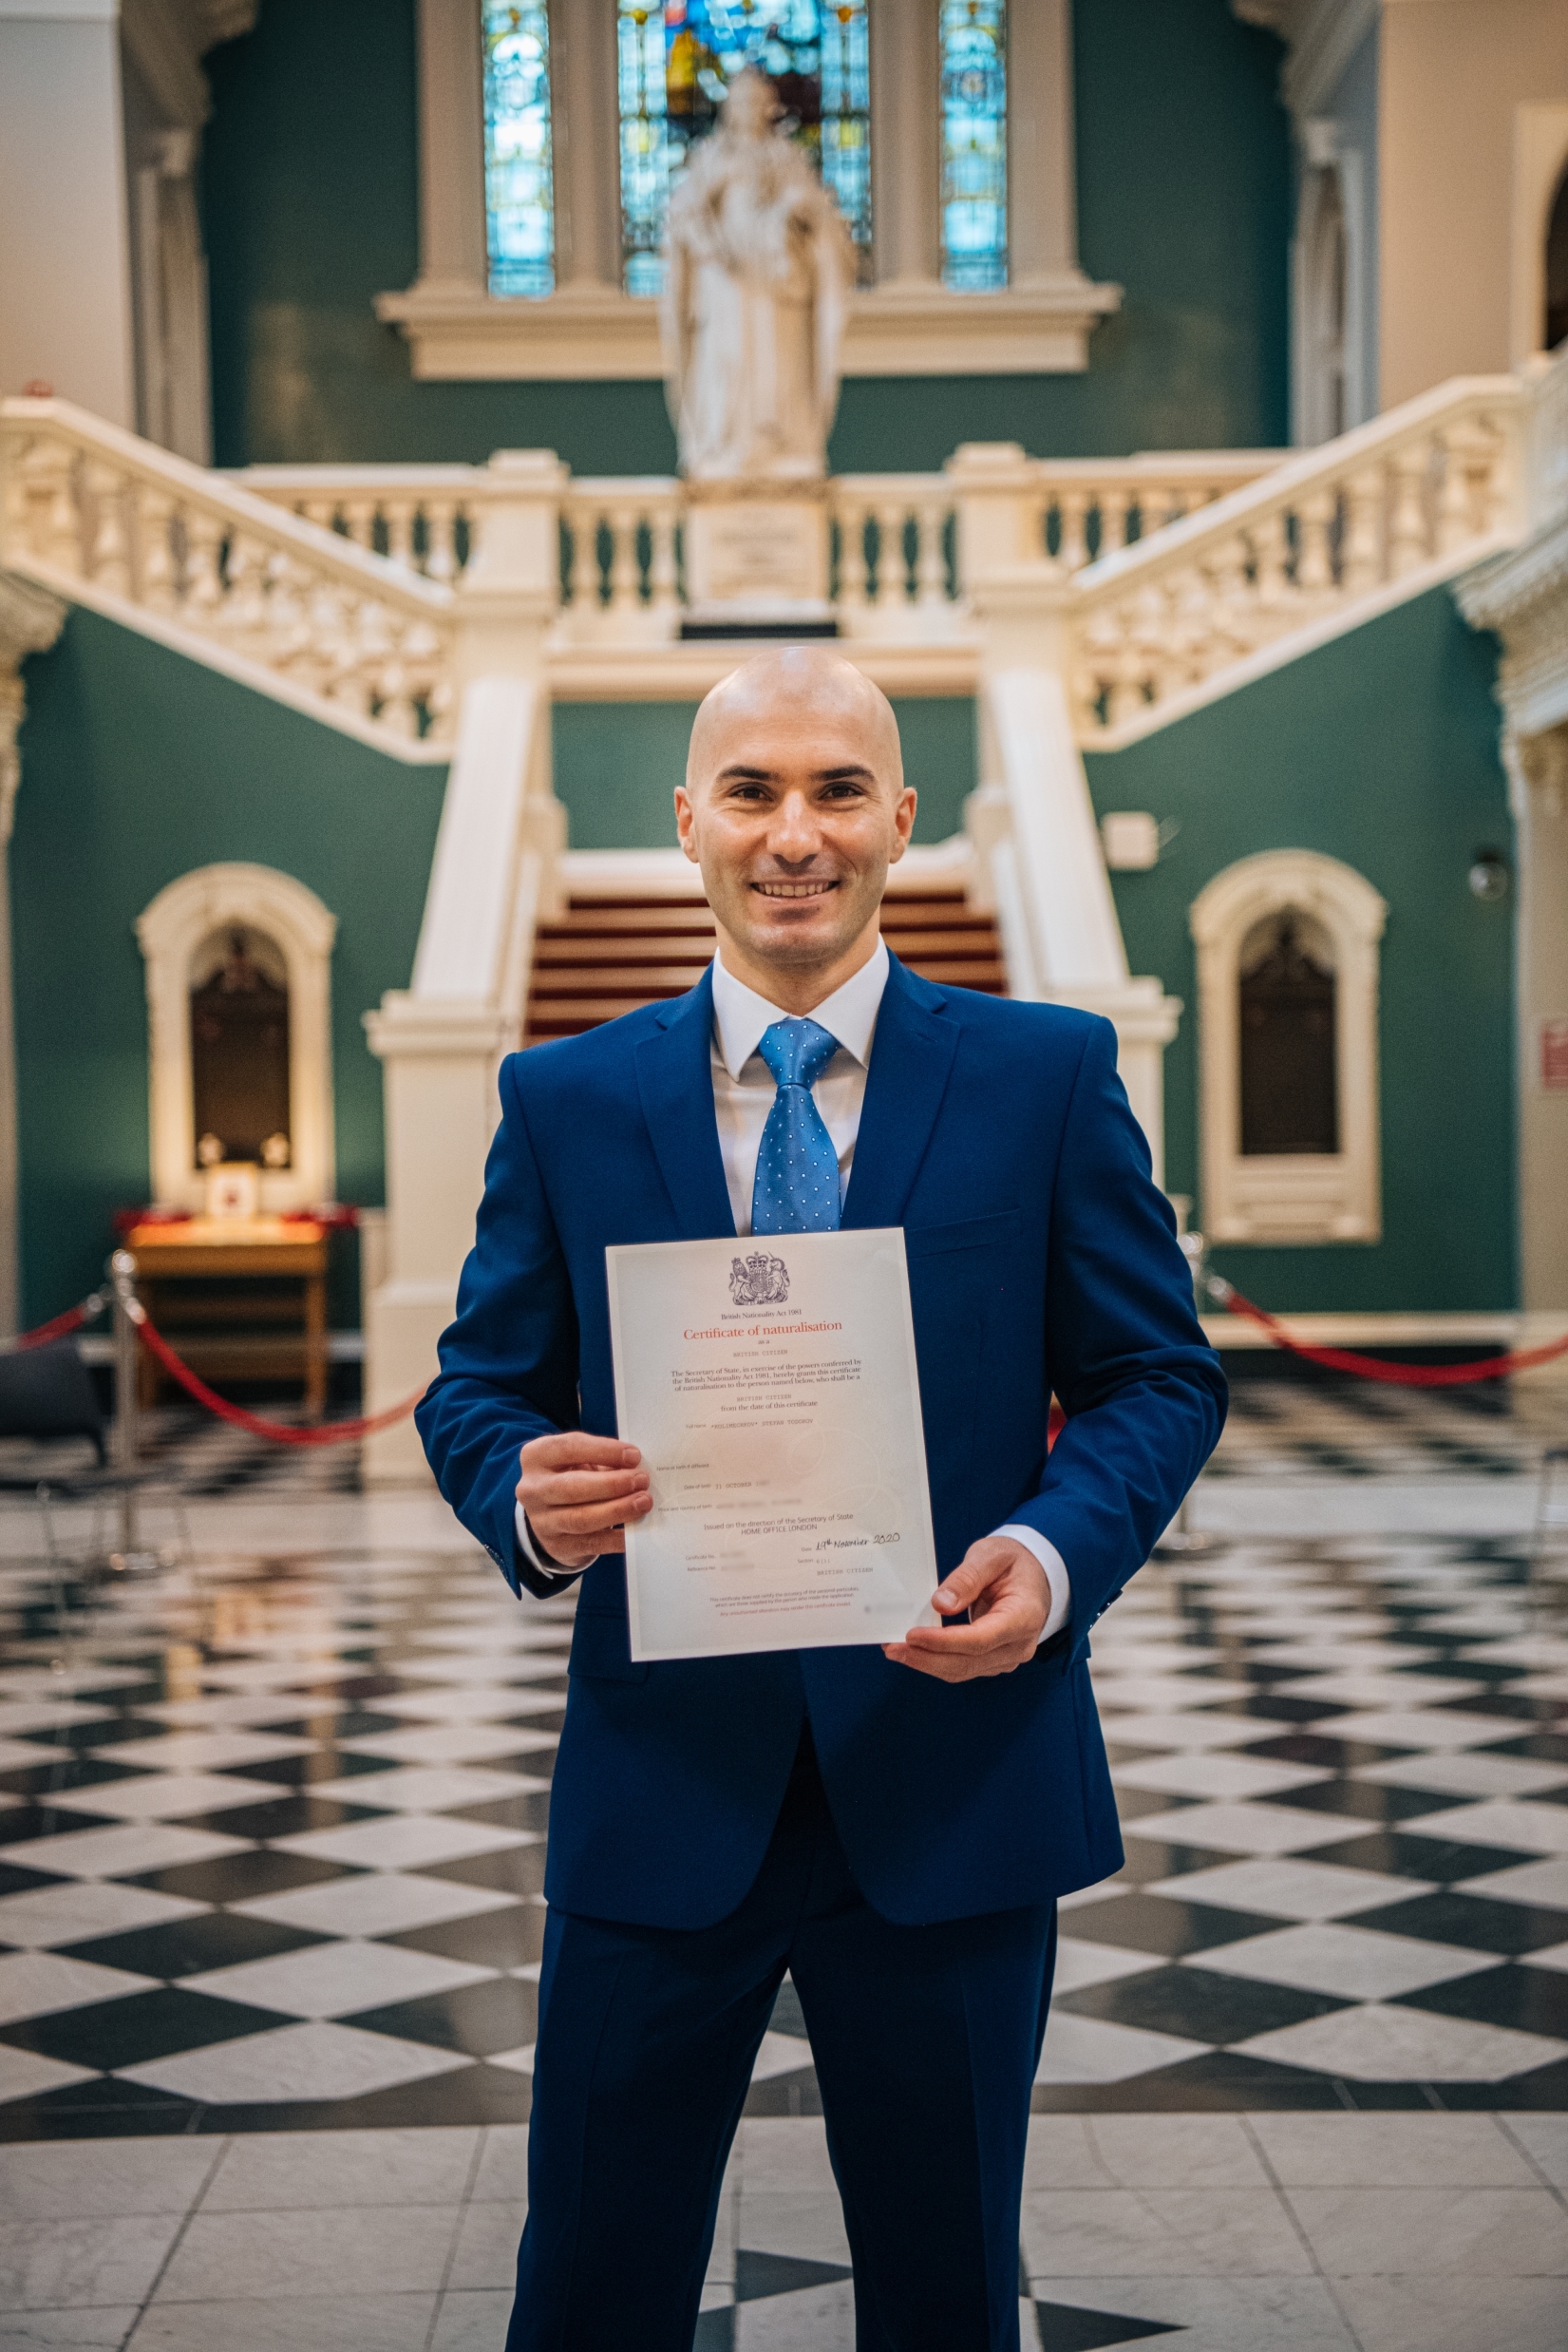 Dr Stefan Kolimechkov at the Woolwich Town Hall, Royal Borough of Greenwich in London